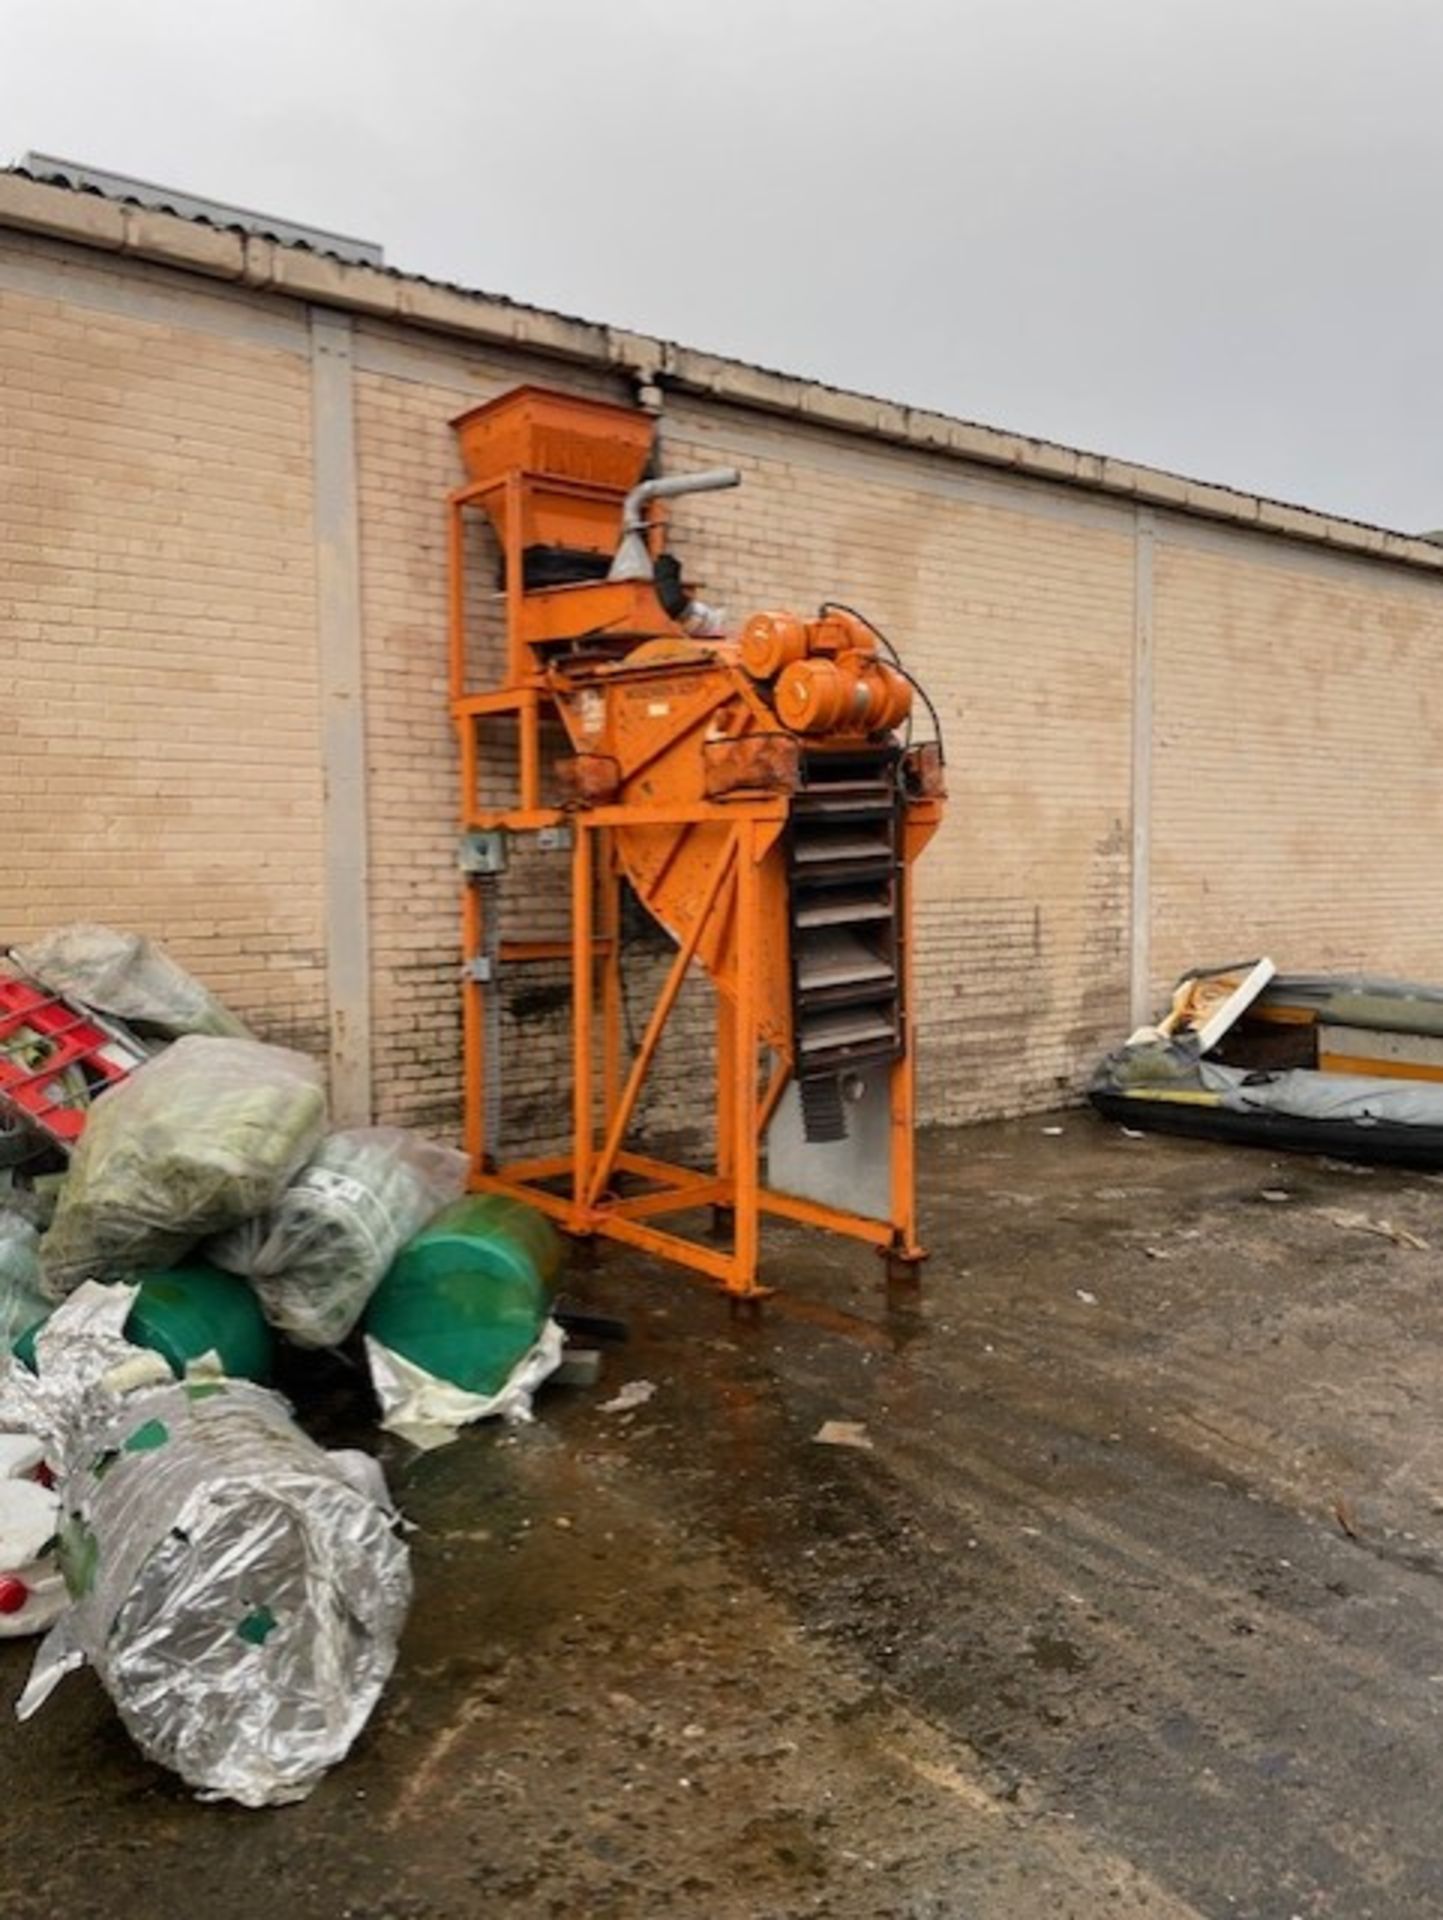 Crusher for crushing bricks 3 phase electric motors on it please note it hasnt got the  power to